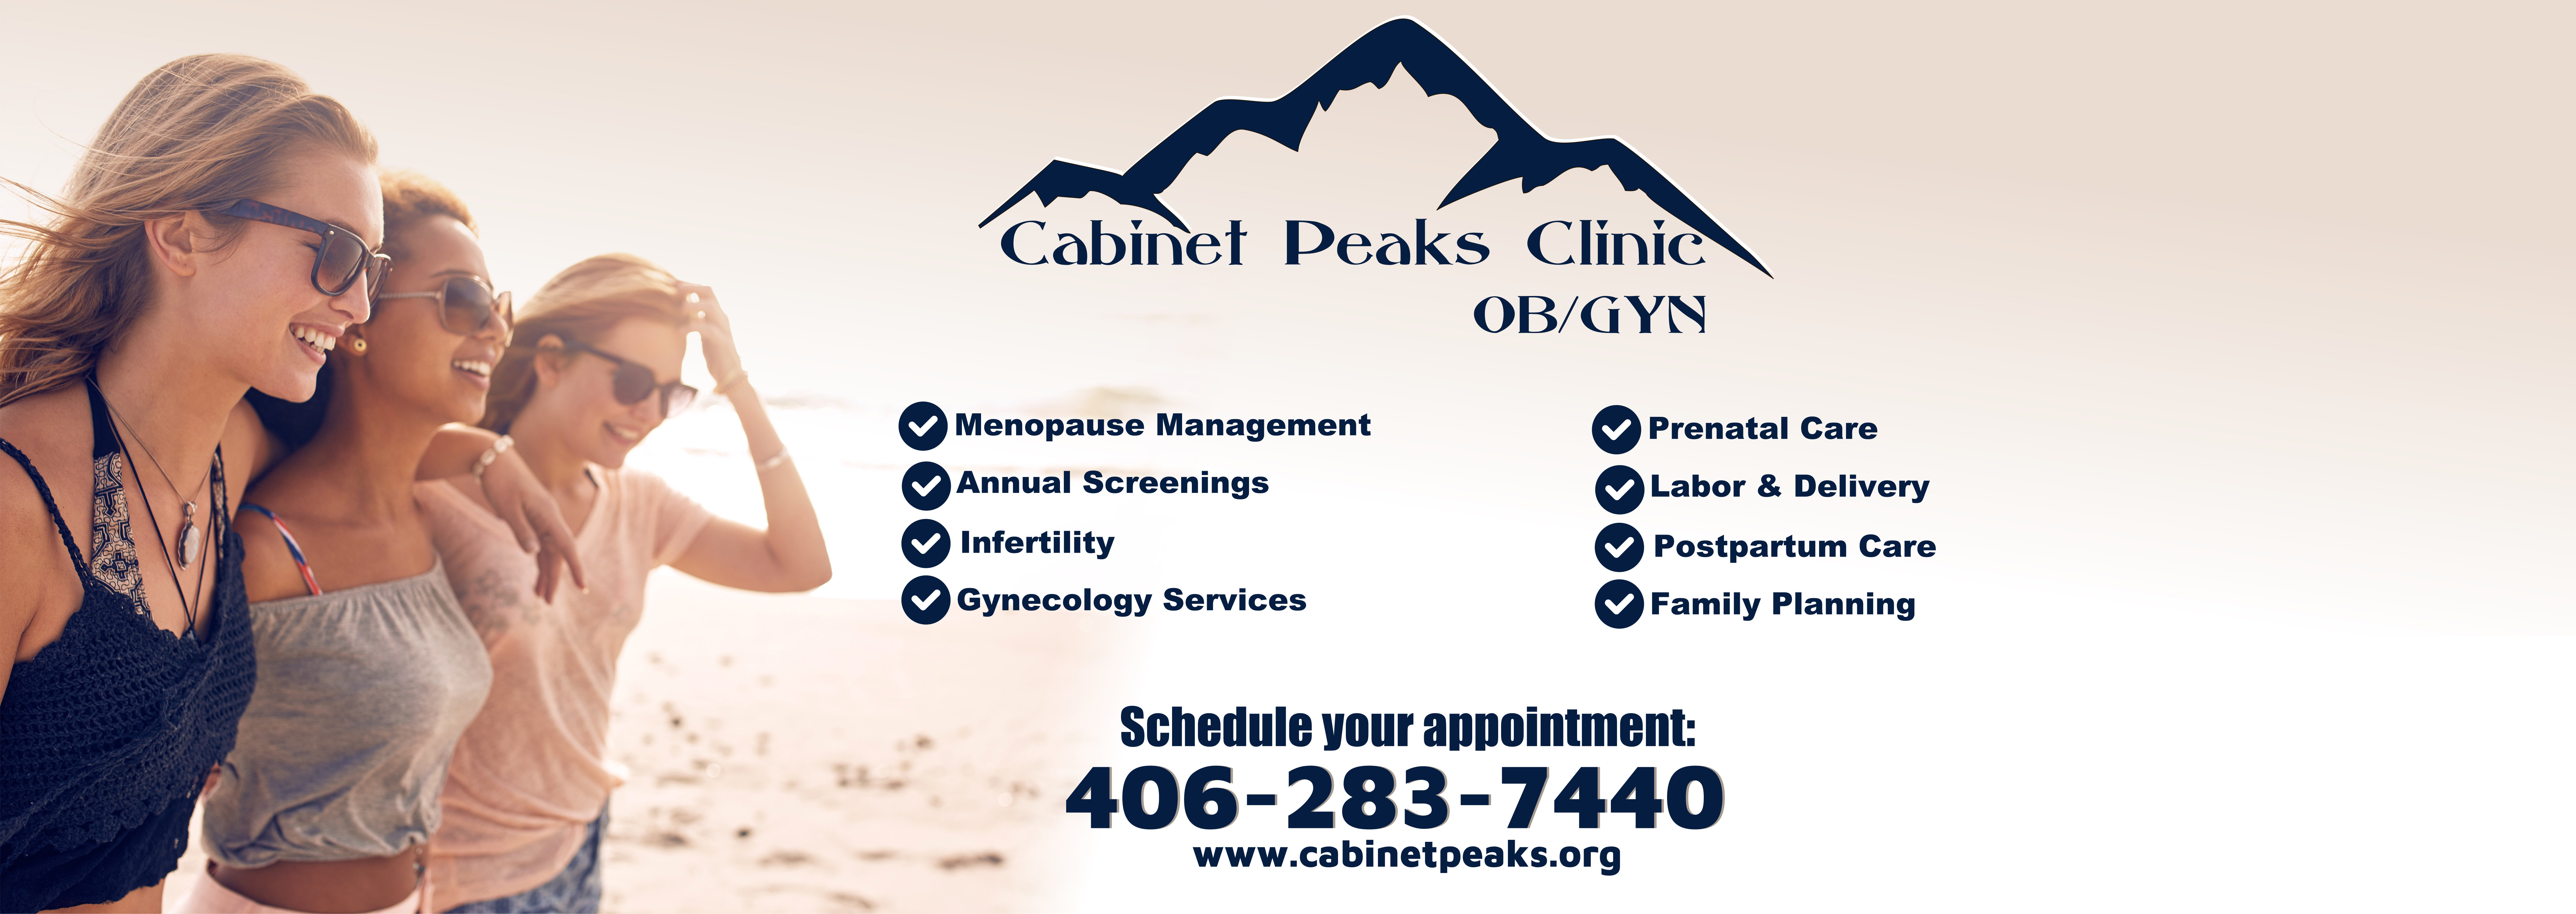 Picture of Cabinet Peaks Medical Center sign